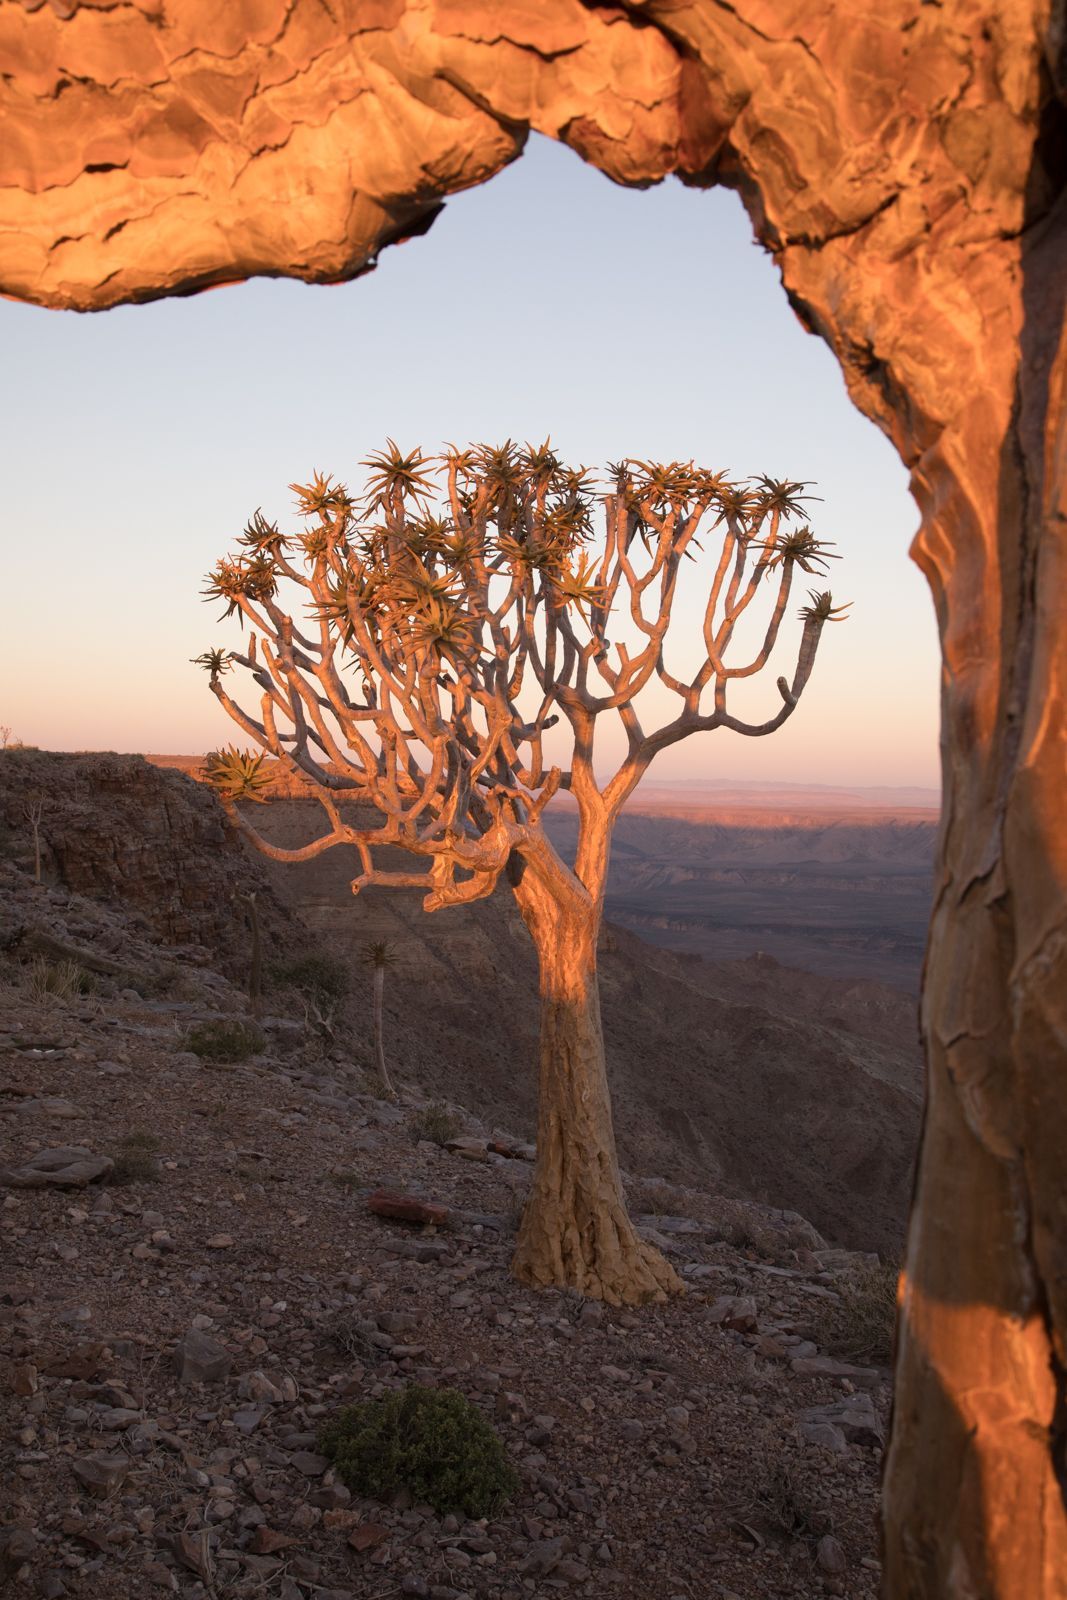 Sunset with the Quiver Trees on the edge of the world at Fish River Canyon